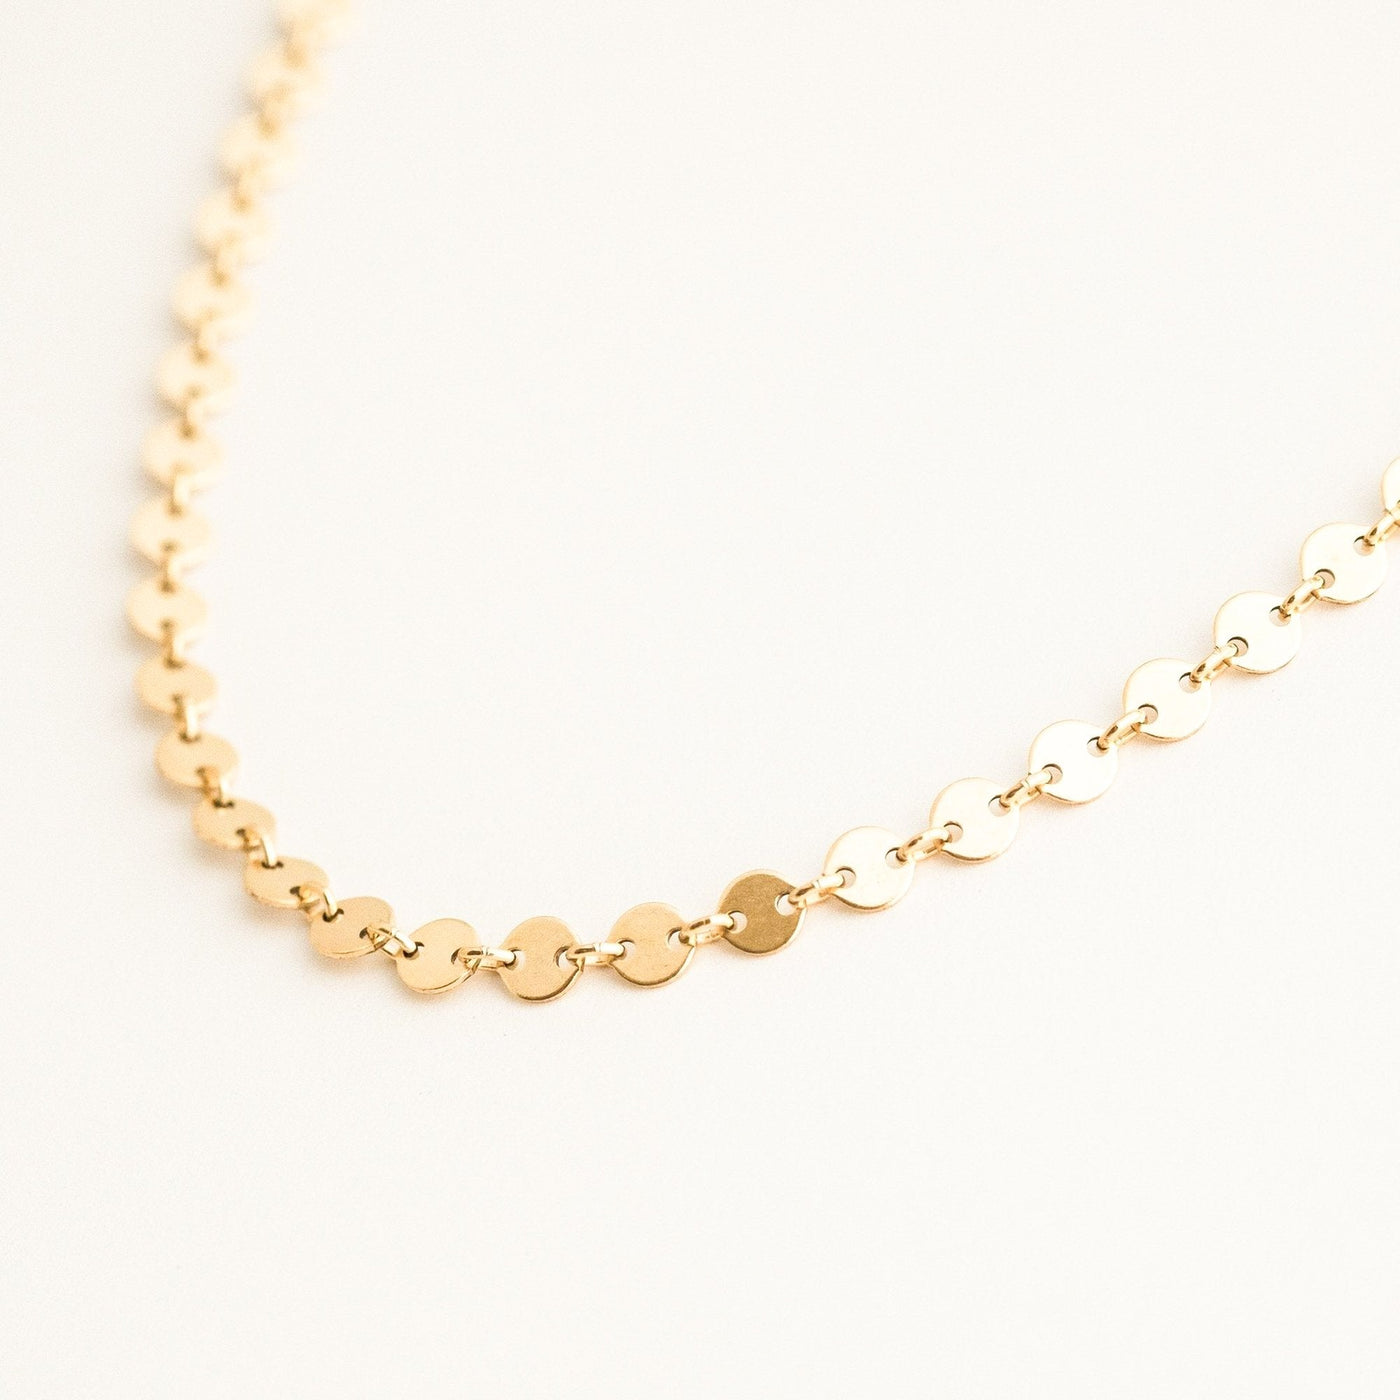 Coin Chain Bracelet by Simple & Dainty Jewelry